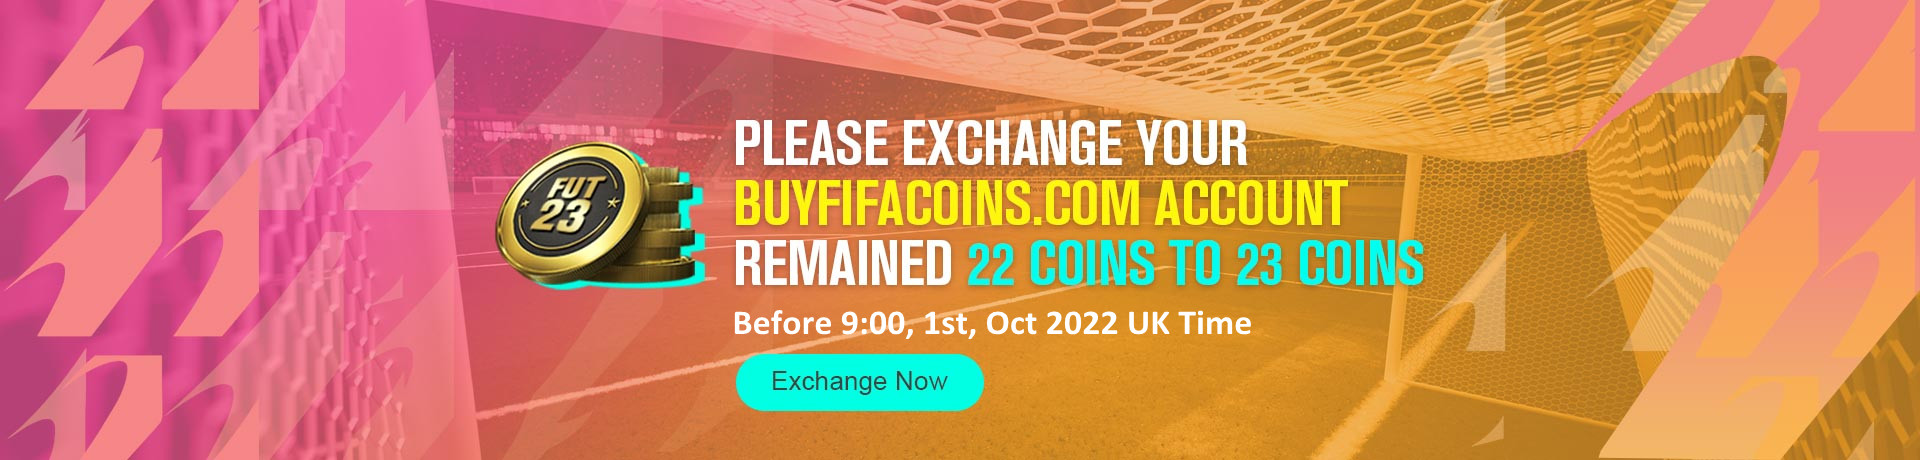 22 coins exchange to 23 coins